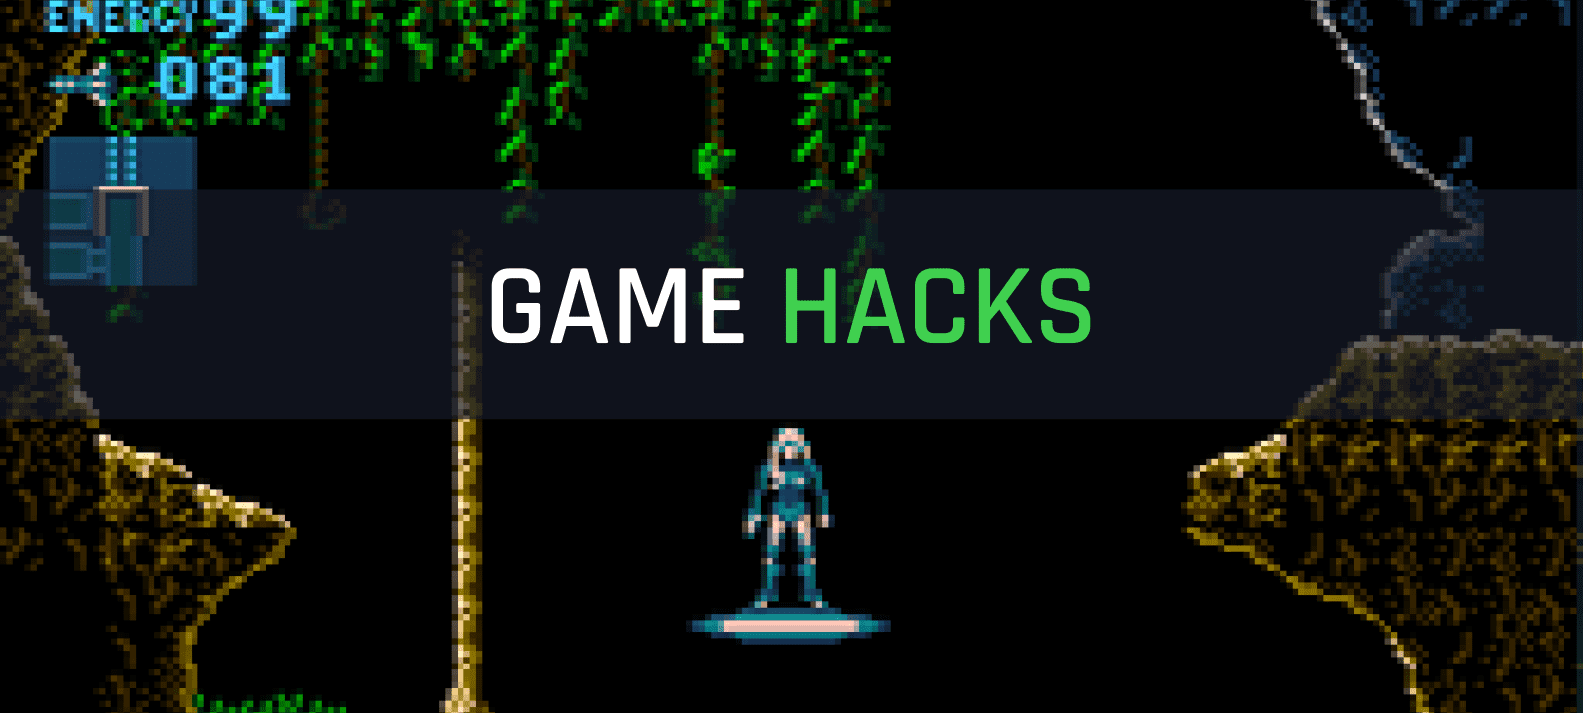 Rediscover your favorite games with Hacks!